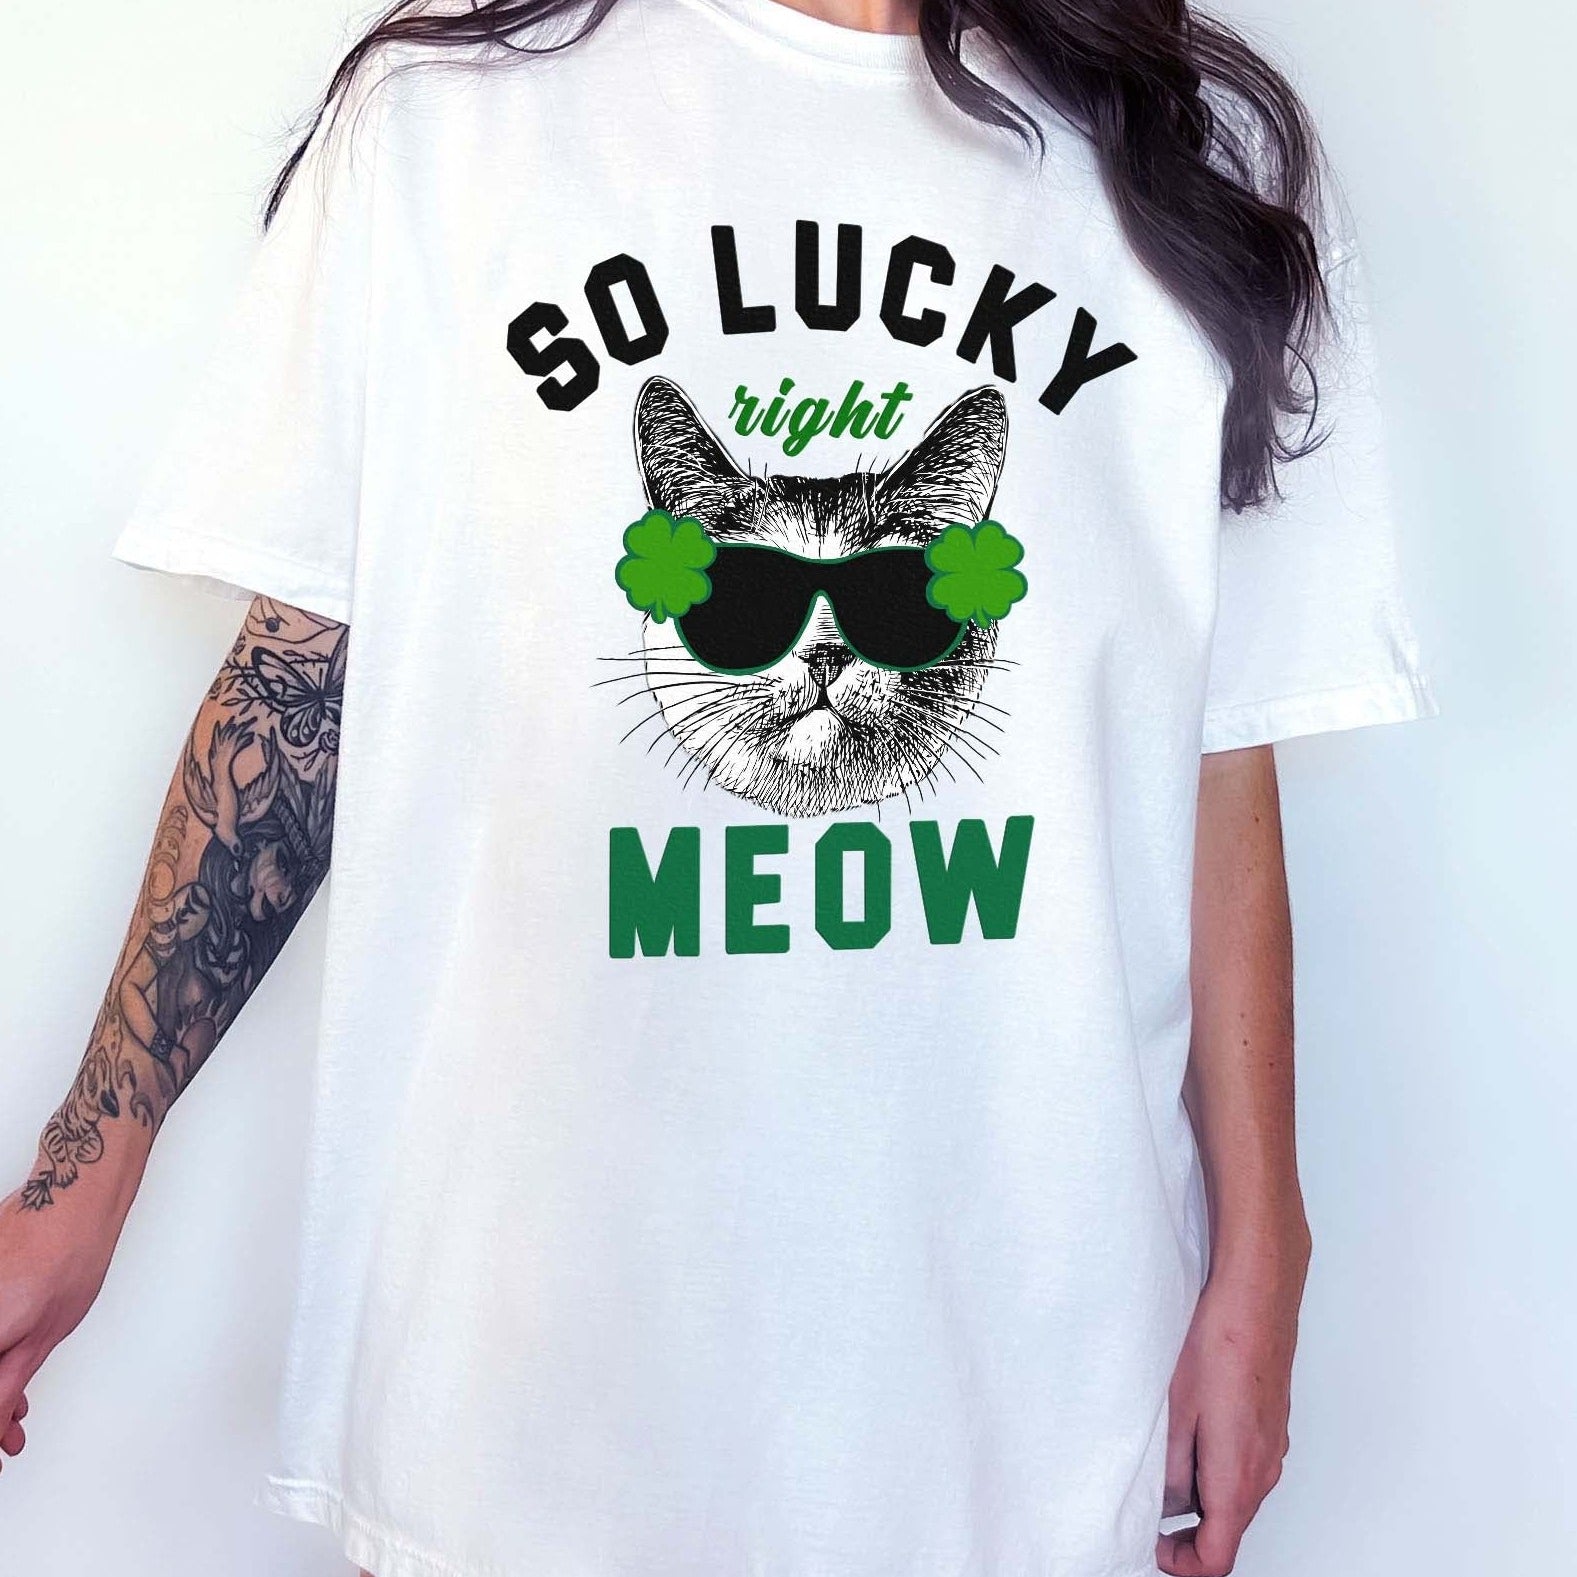 So Lucky Right Meow Saint Patrick's Day Tee